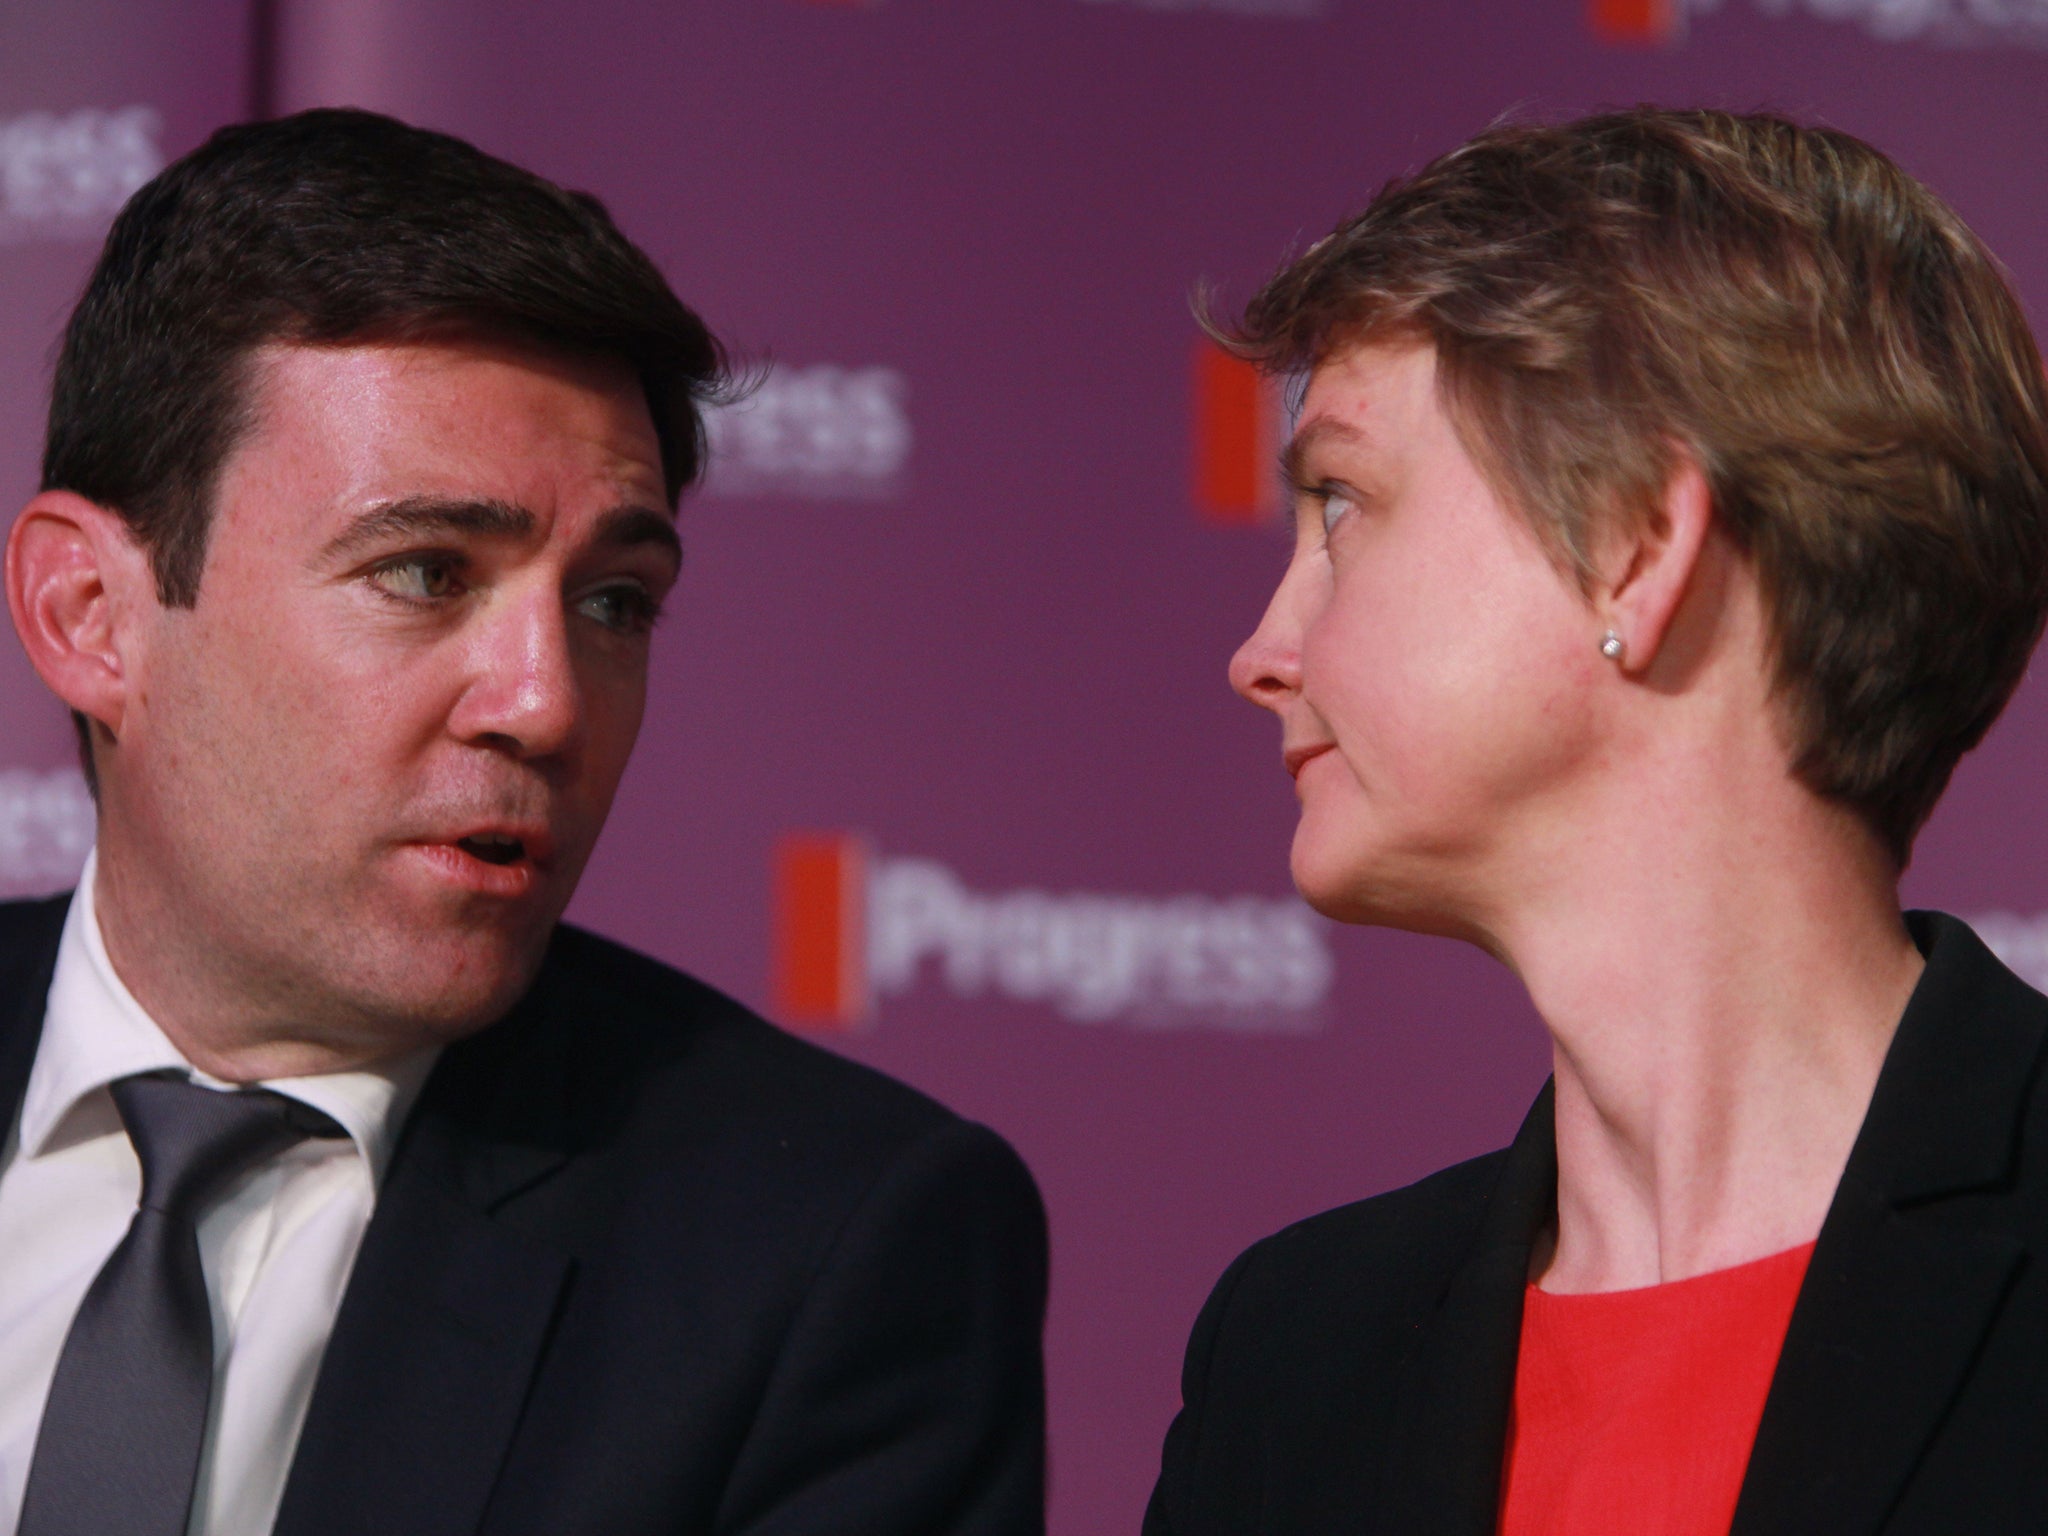 There are fears that the Unite union are trying to manipulate the Labour leadership contest into a two-horse race between Andy Burnham and Yvette Cooper